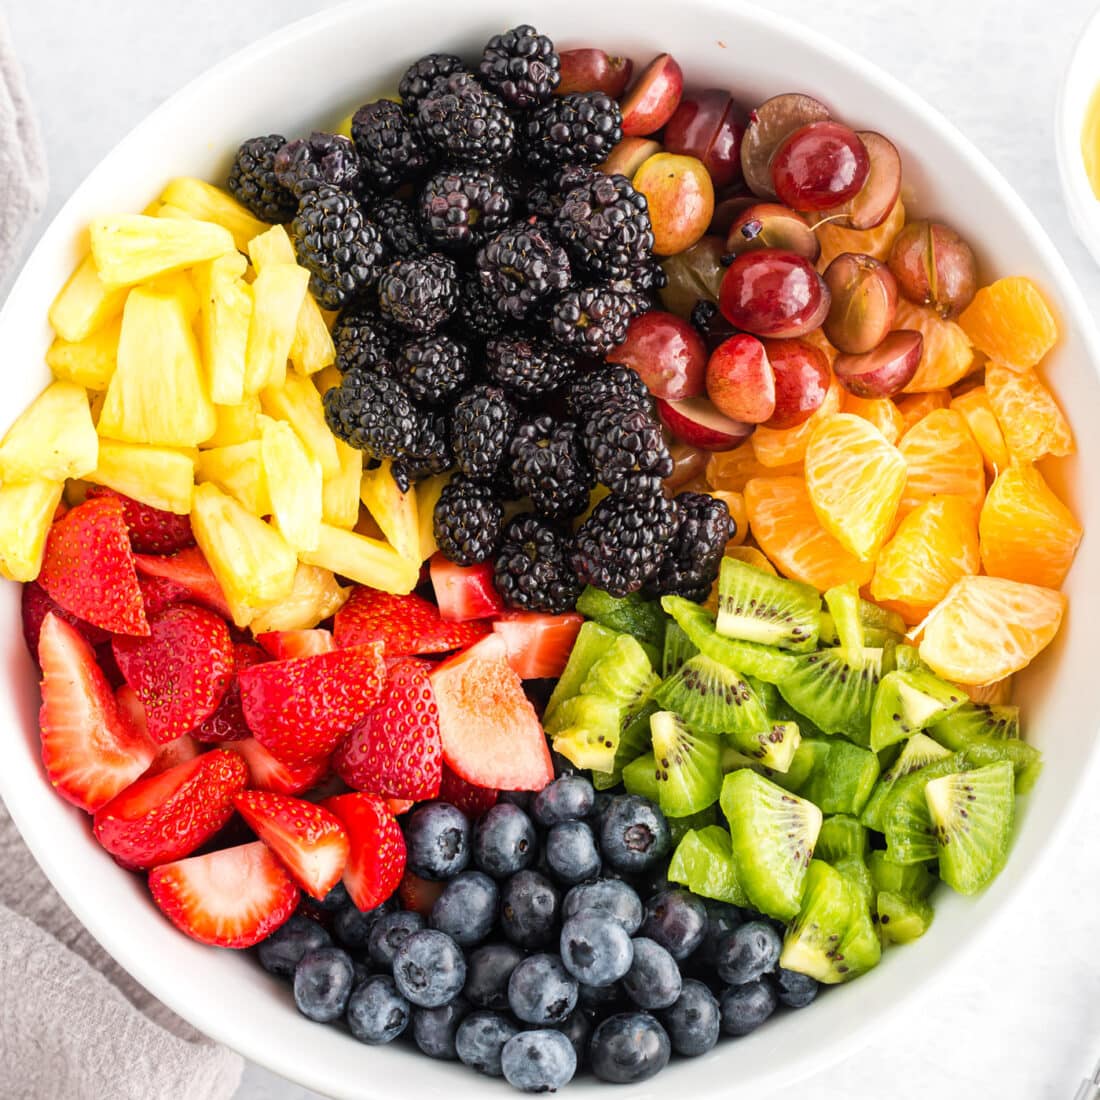 Assortment of fruit in a bowl